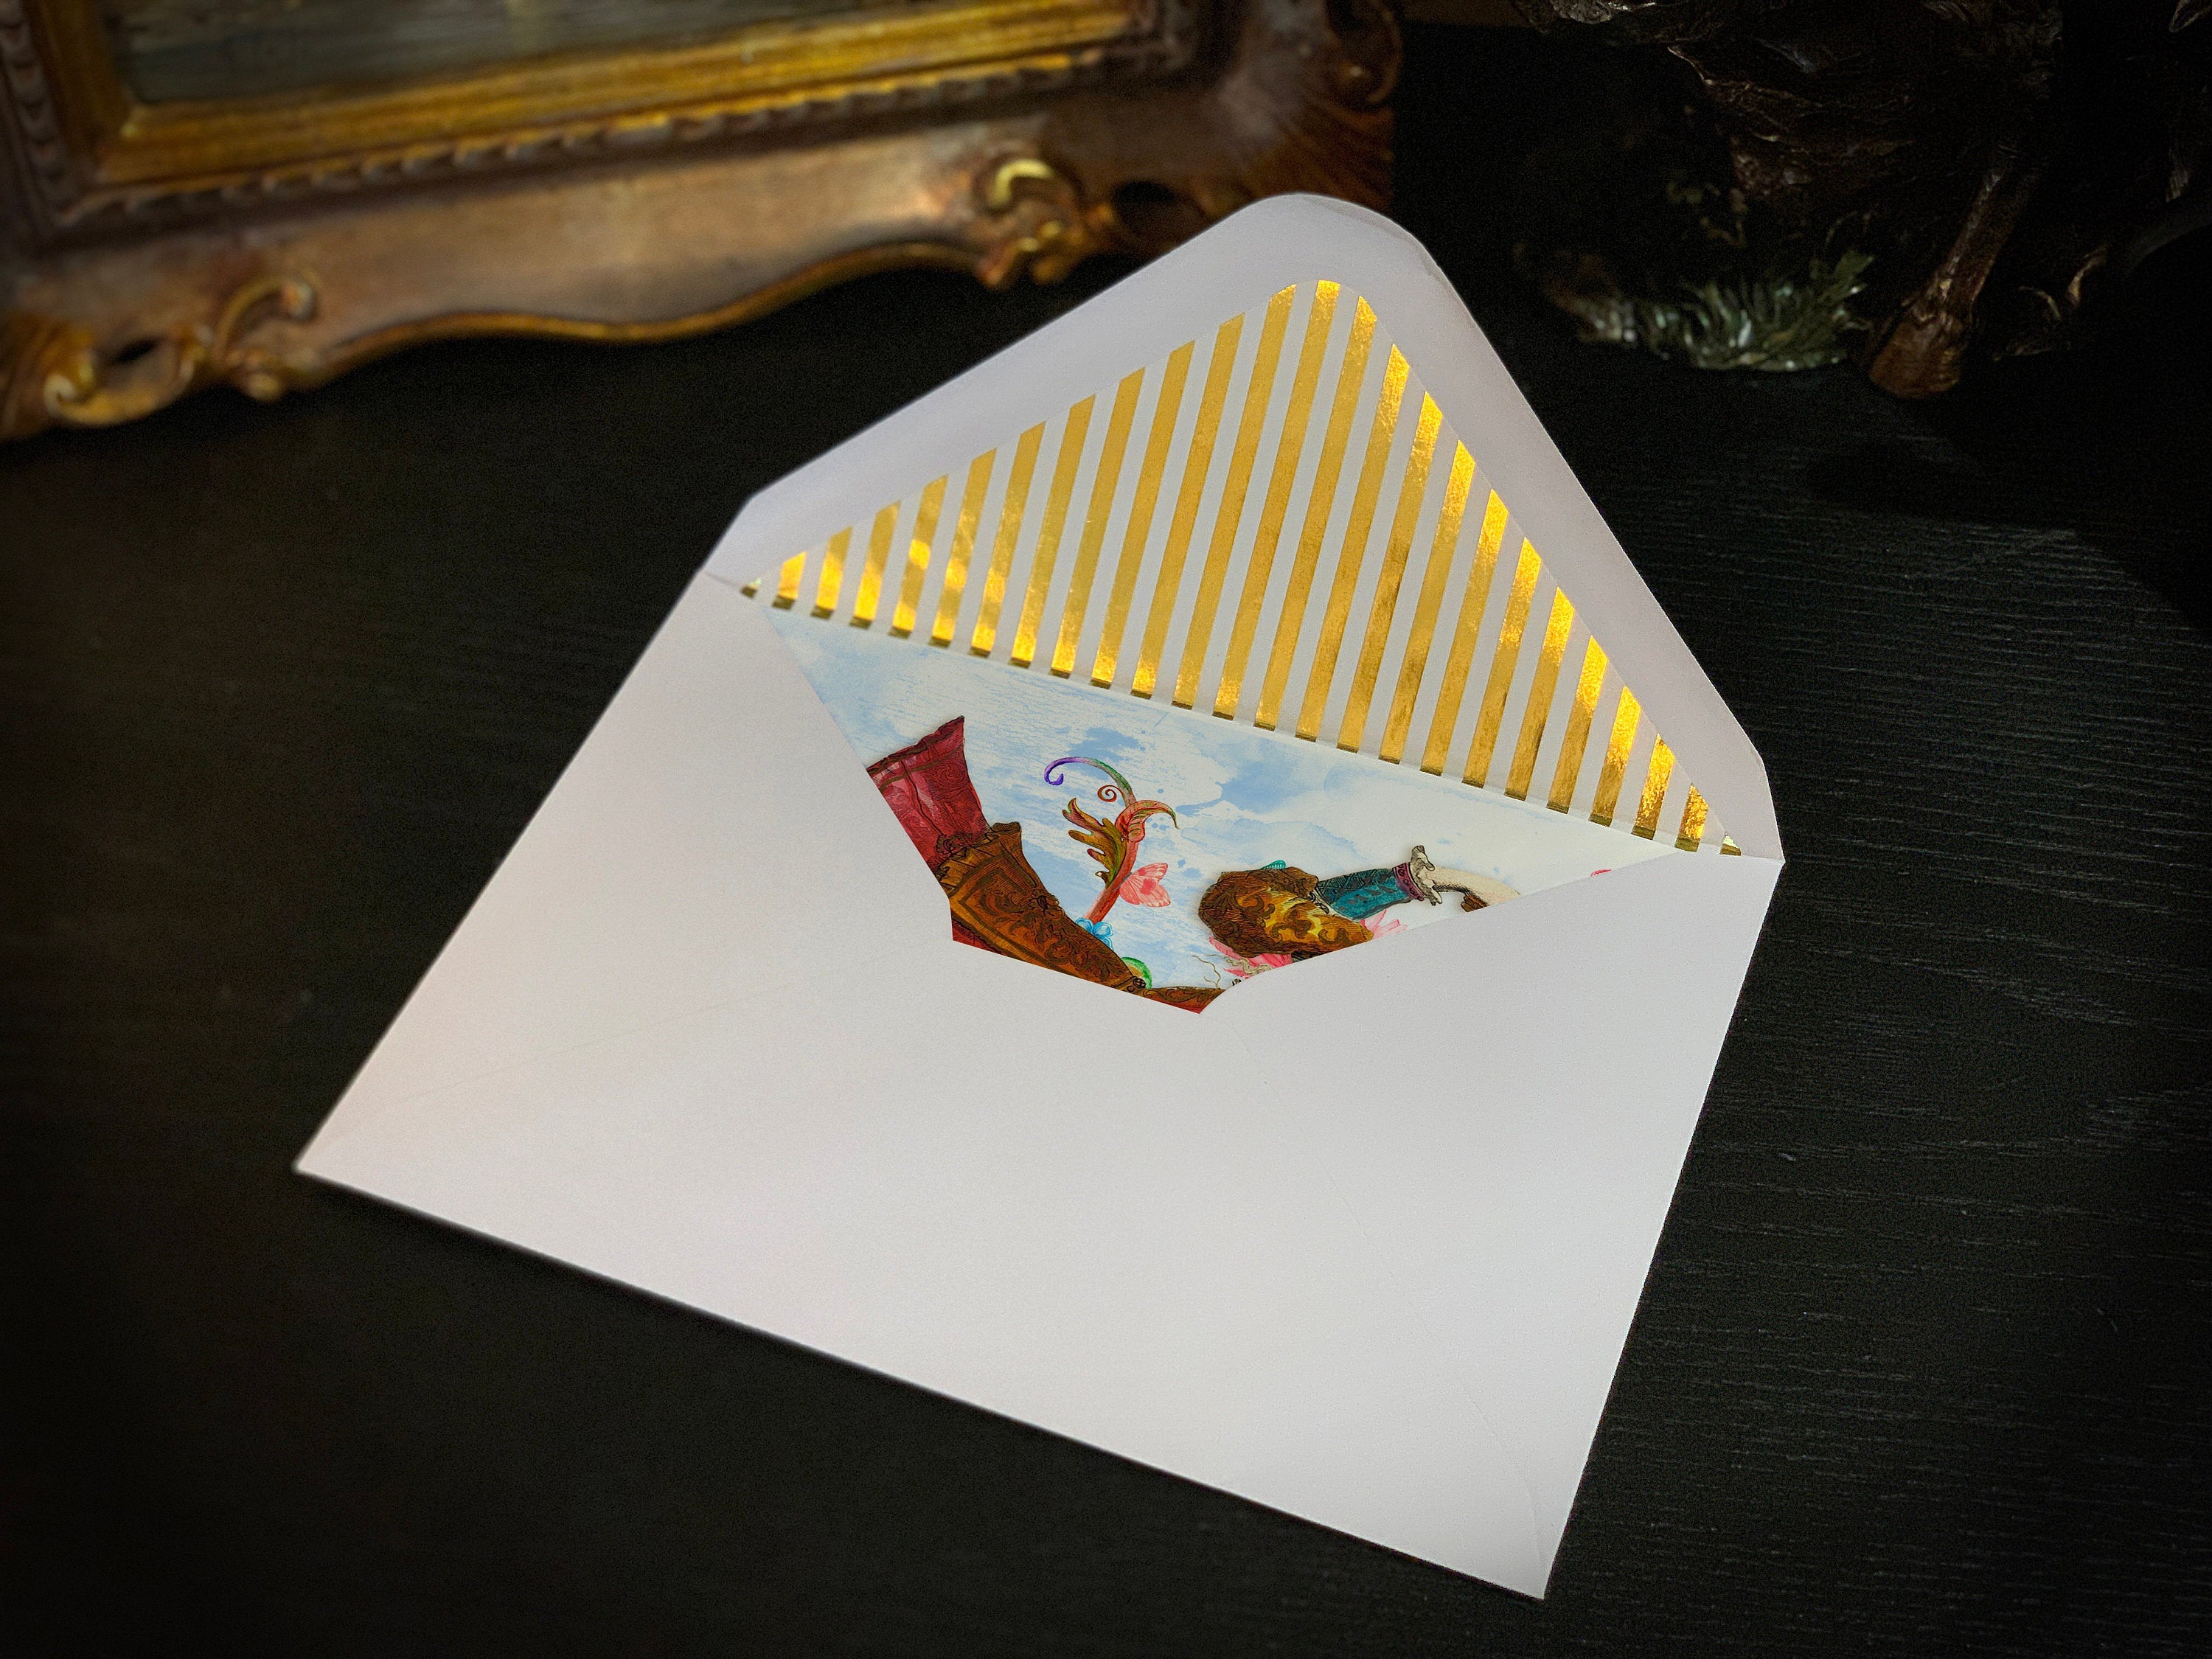 Have a Fabulous Birthday, Dandy Greeting Card with Elegant Striped Gold Foil Envelope, 1 Card/Envelope